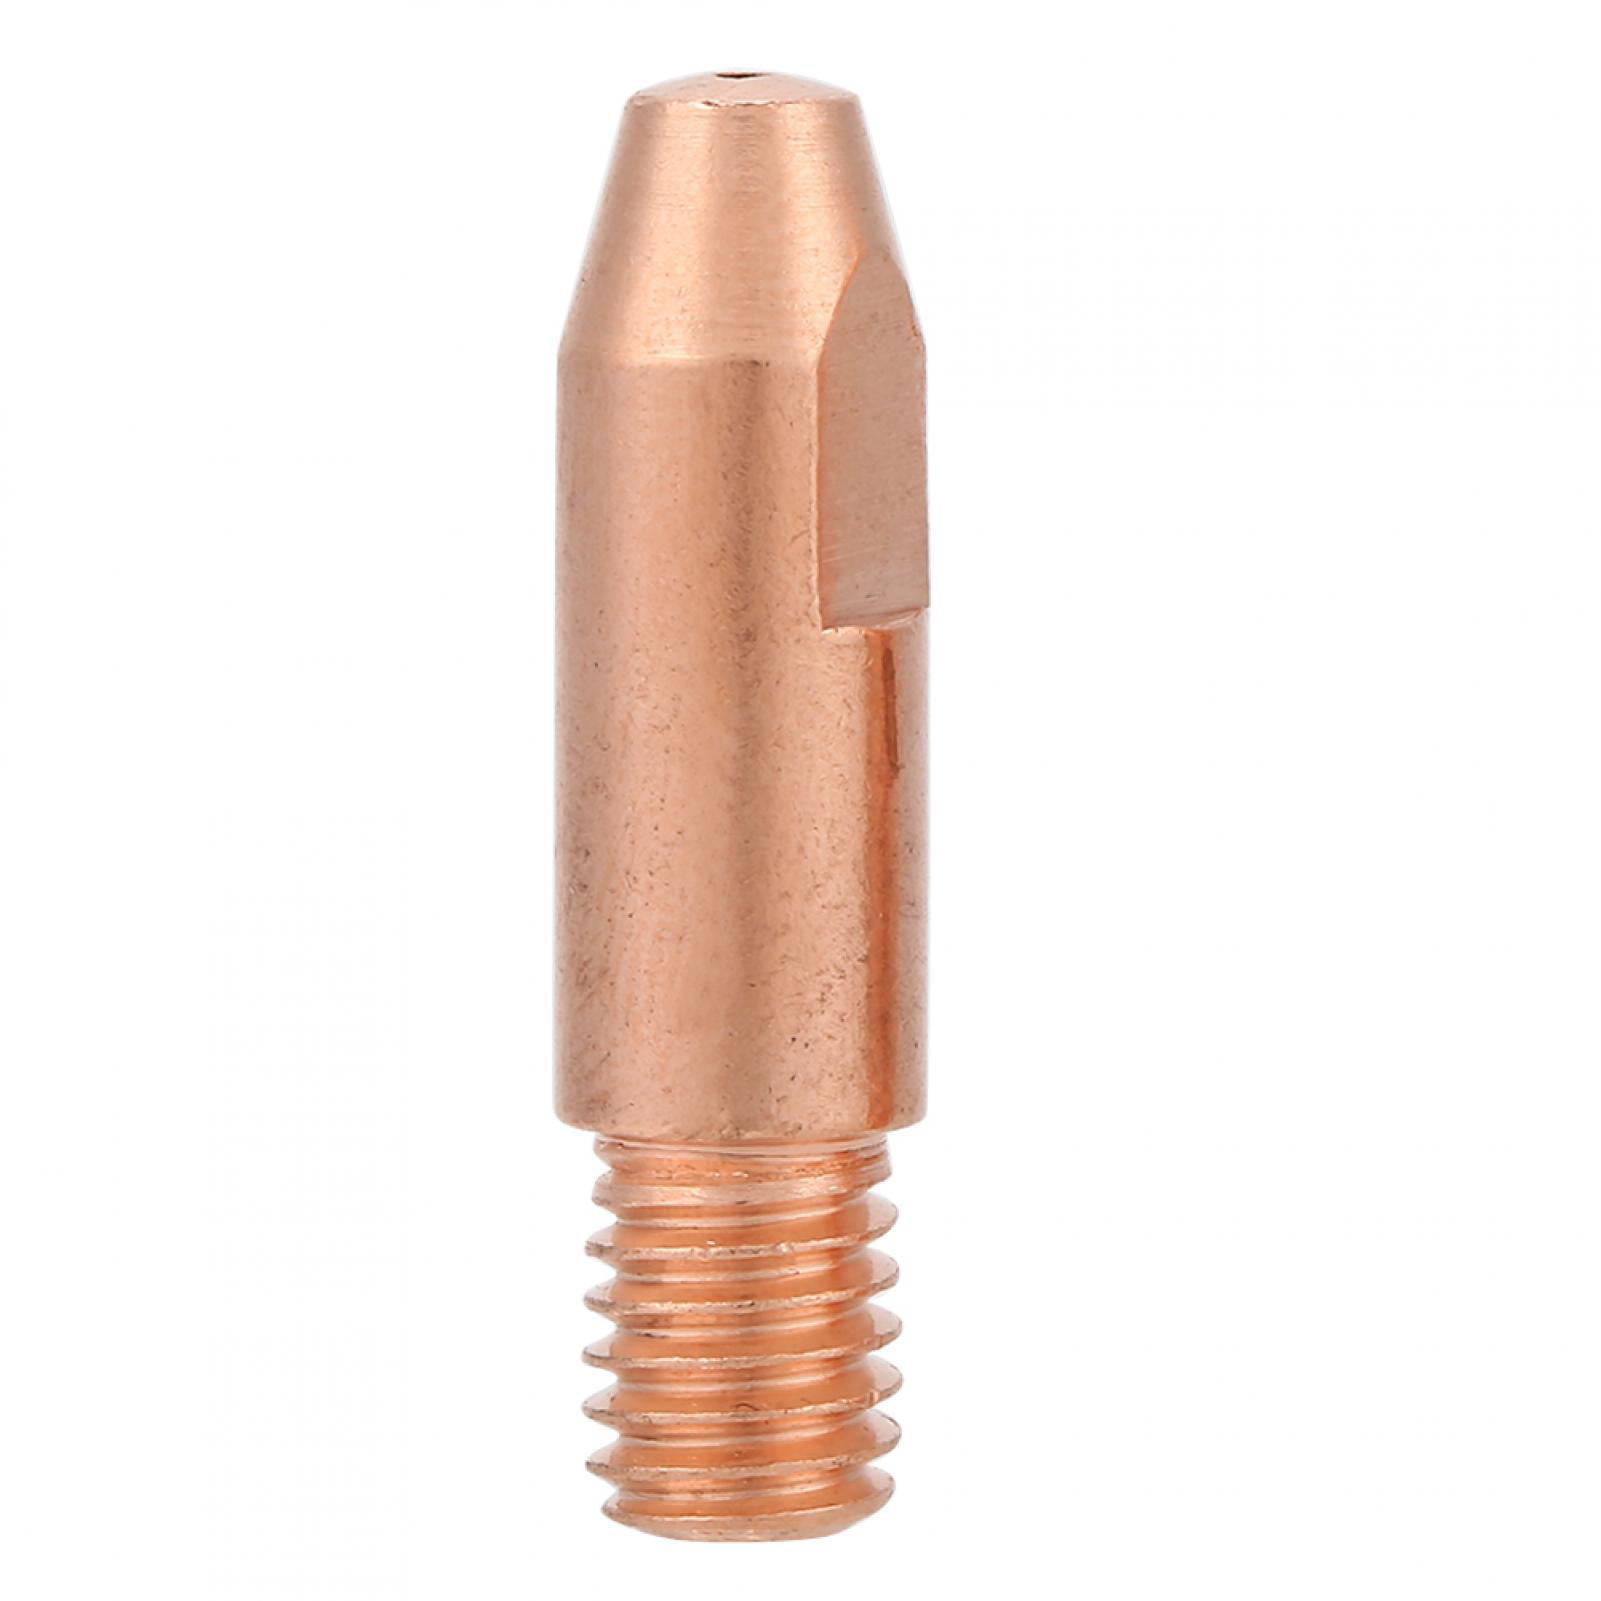 1.2 Sturdy Corrosion for MAG Welding Torch Factory Miller Home 20Pcs Brand New High Temperature Welding Torch Contact Tip Contact Tip 